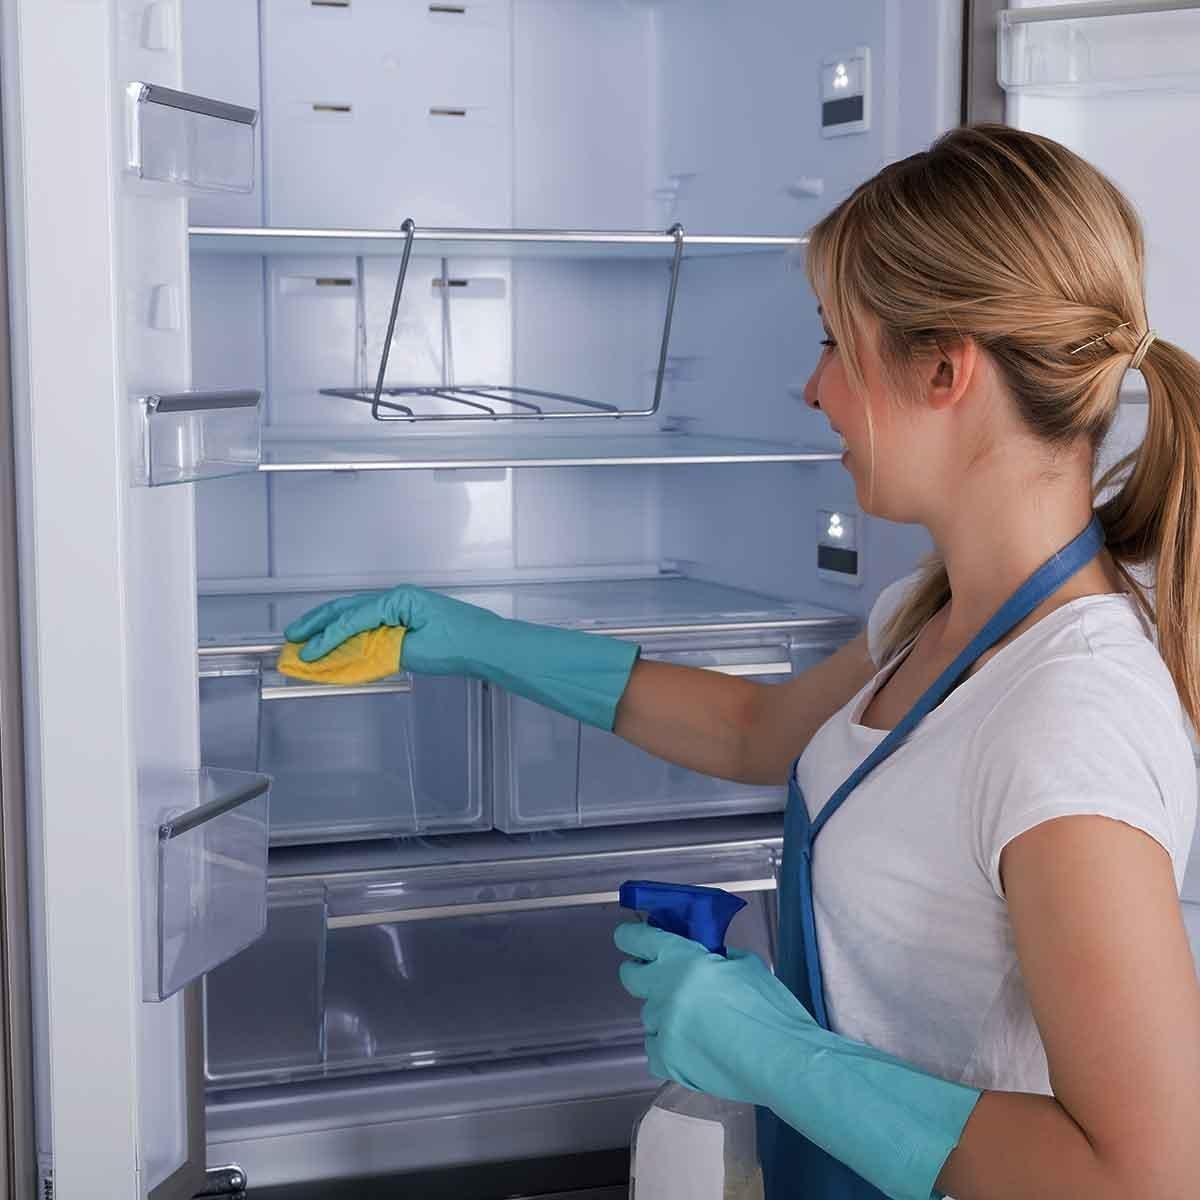 National_clean_out_your_refrigerator_day_blog.jpg.1400x1400_q85_crop-scale